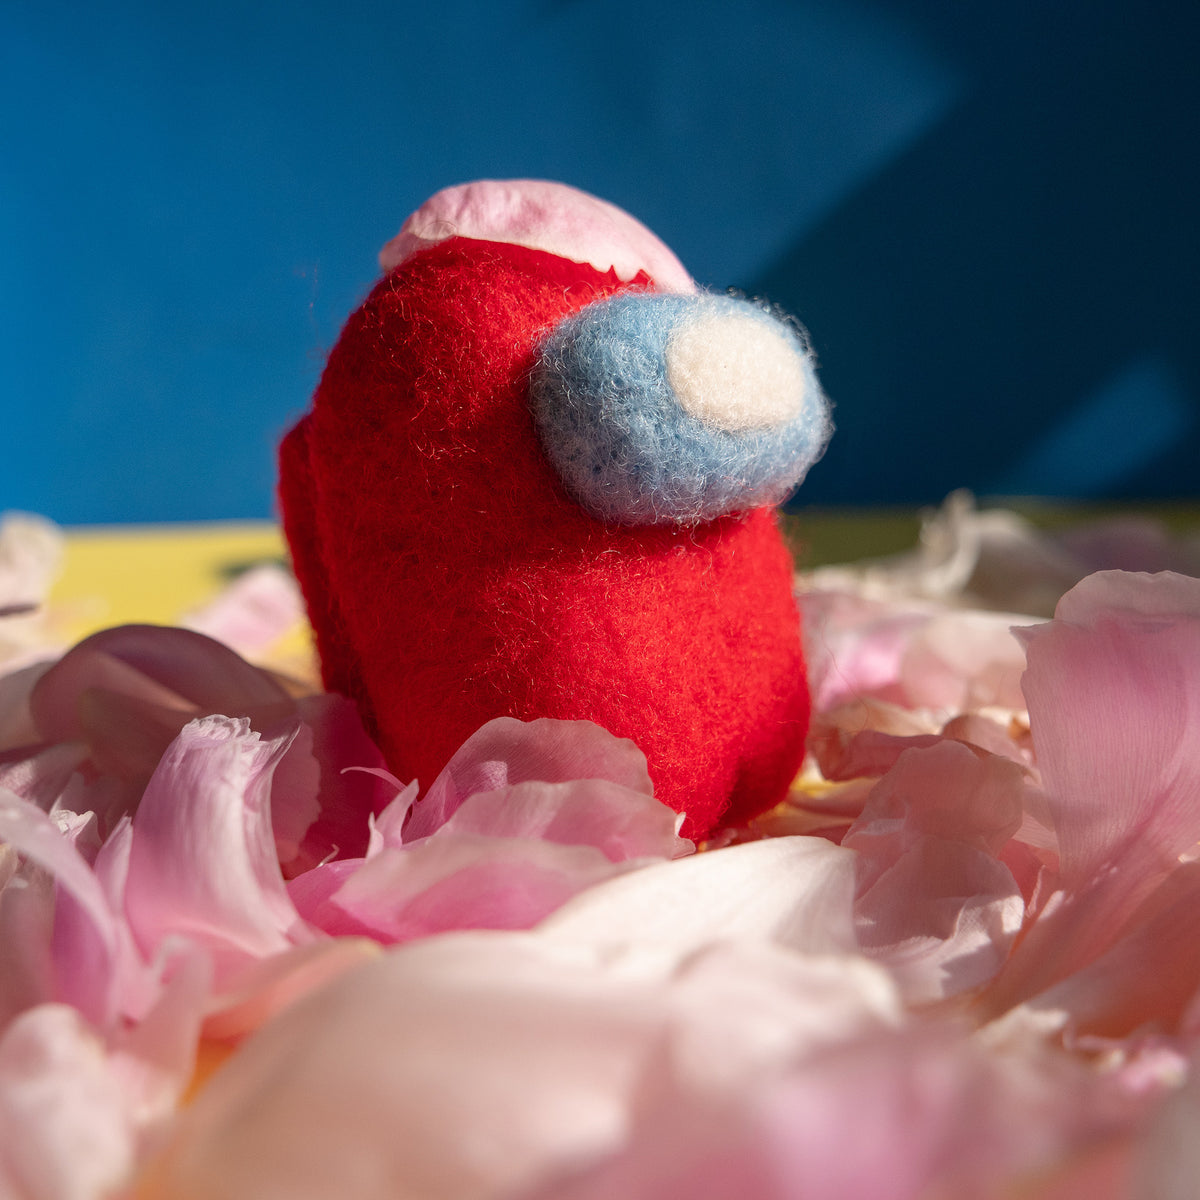 Red felted crewmate standing in a pile of pnk flower petals, with one flower petal on its head